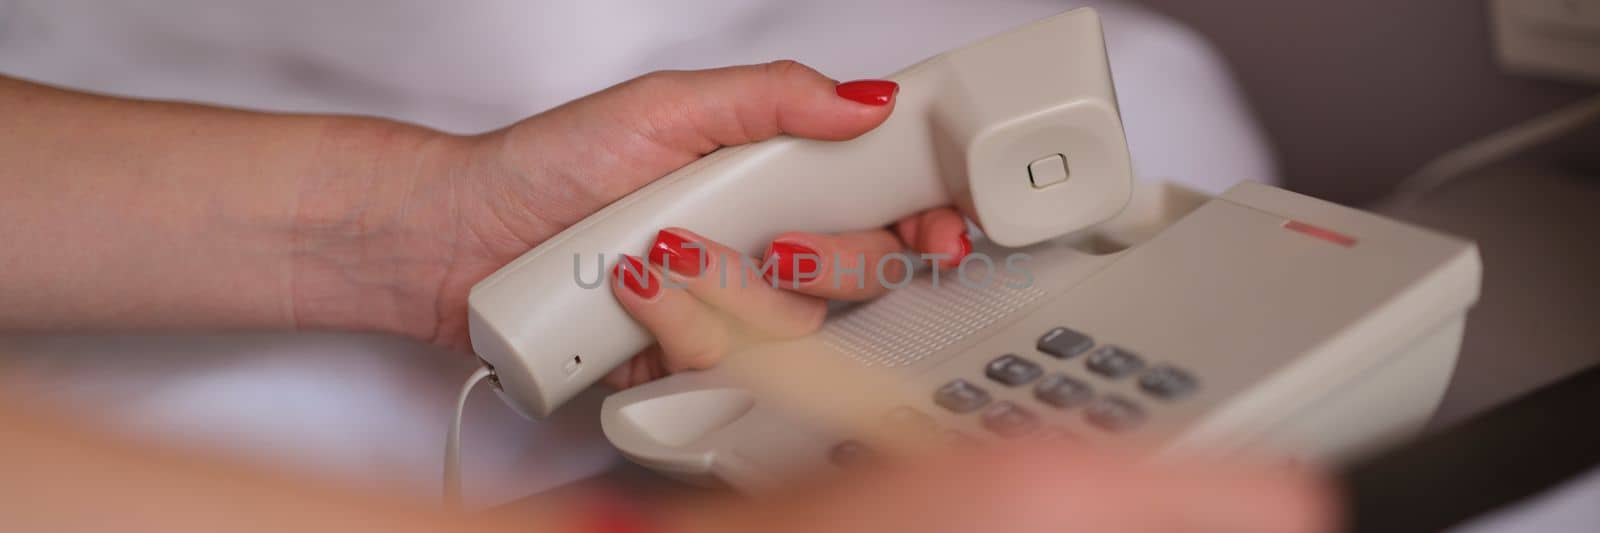 Woman picks up phone and dials number for room service in hotel closeup. Hotel service and call to reception concept